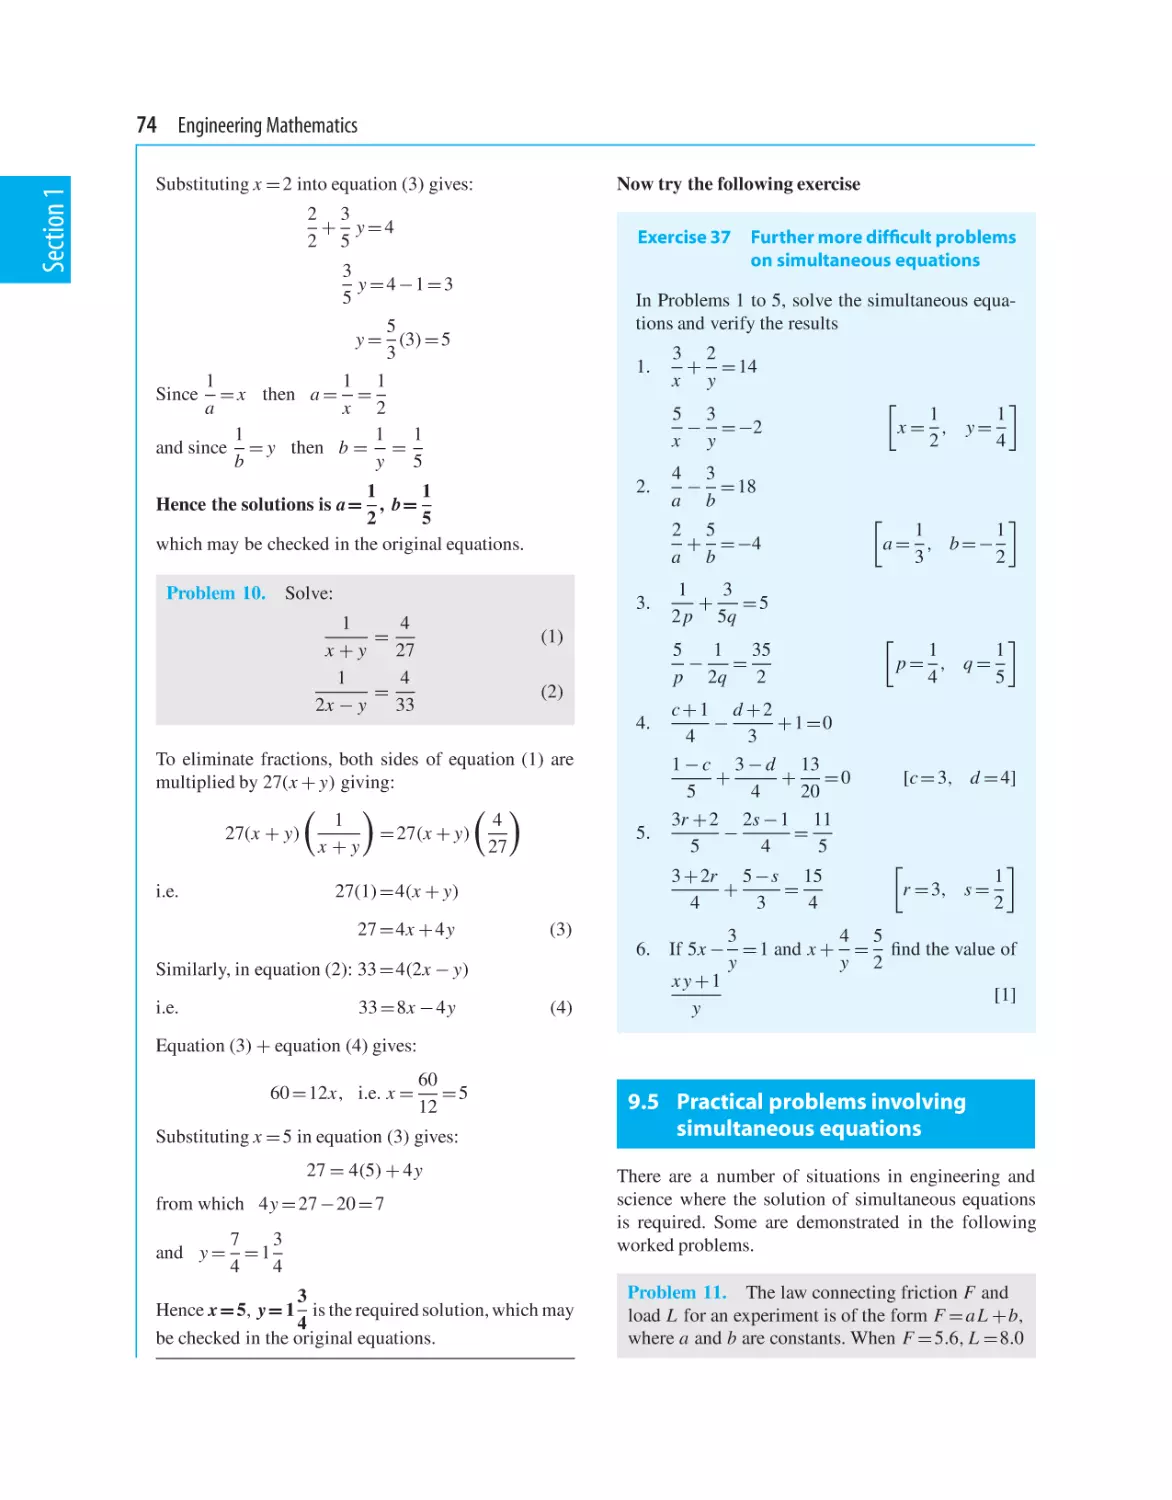 9.5 Practical problems involving simultaneous equations